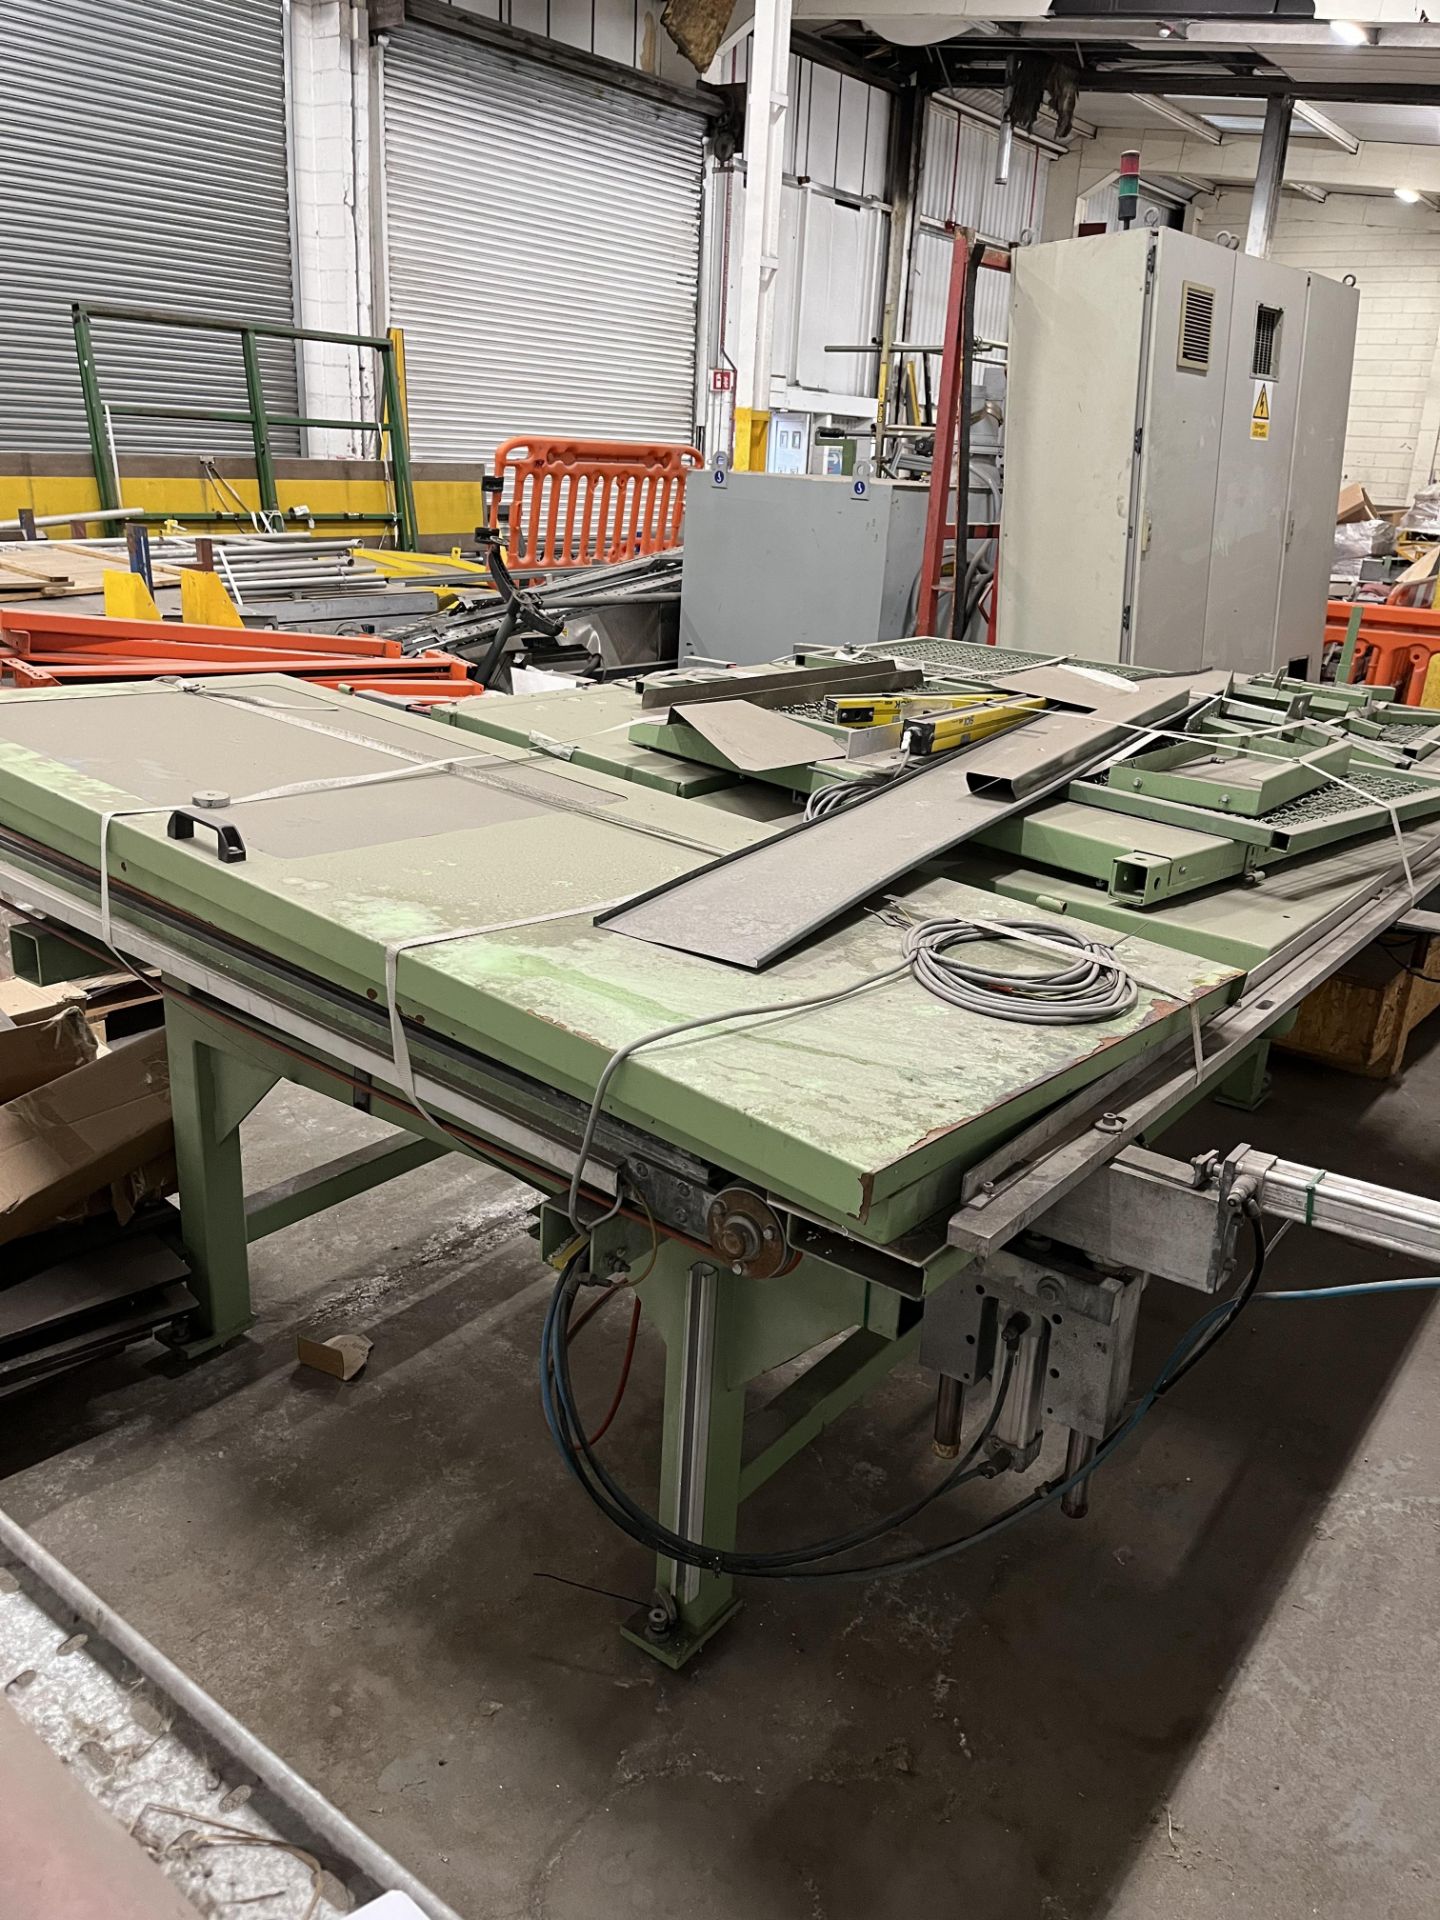 2, Rapid outfeed/infeed conveyors